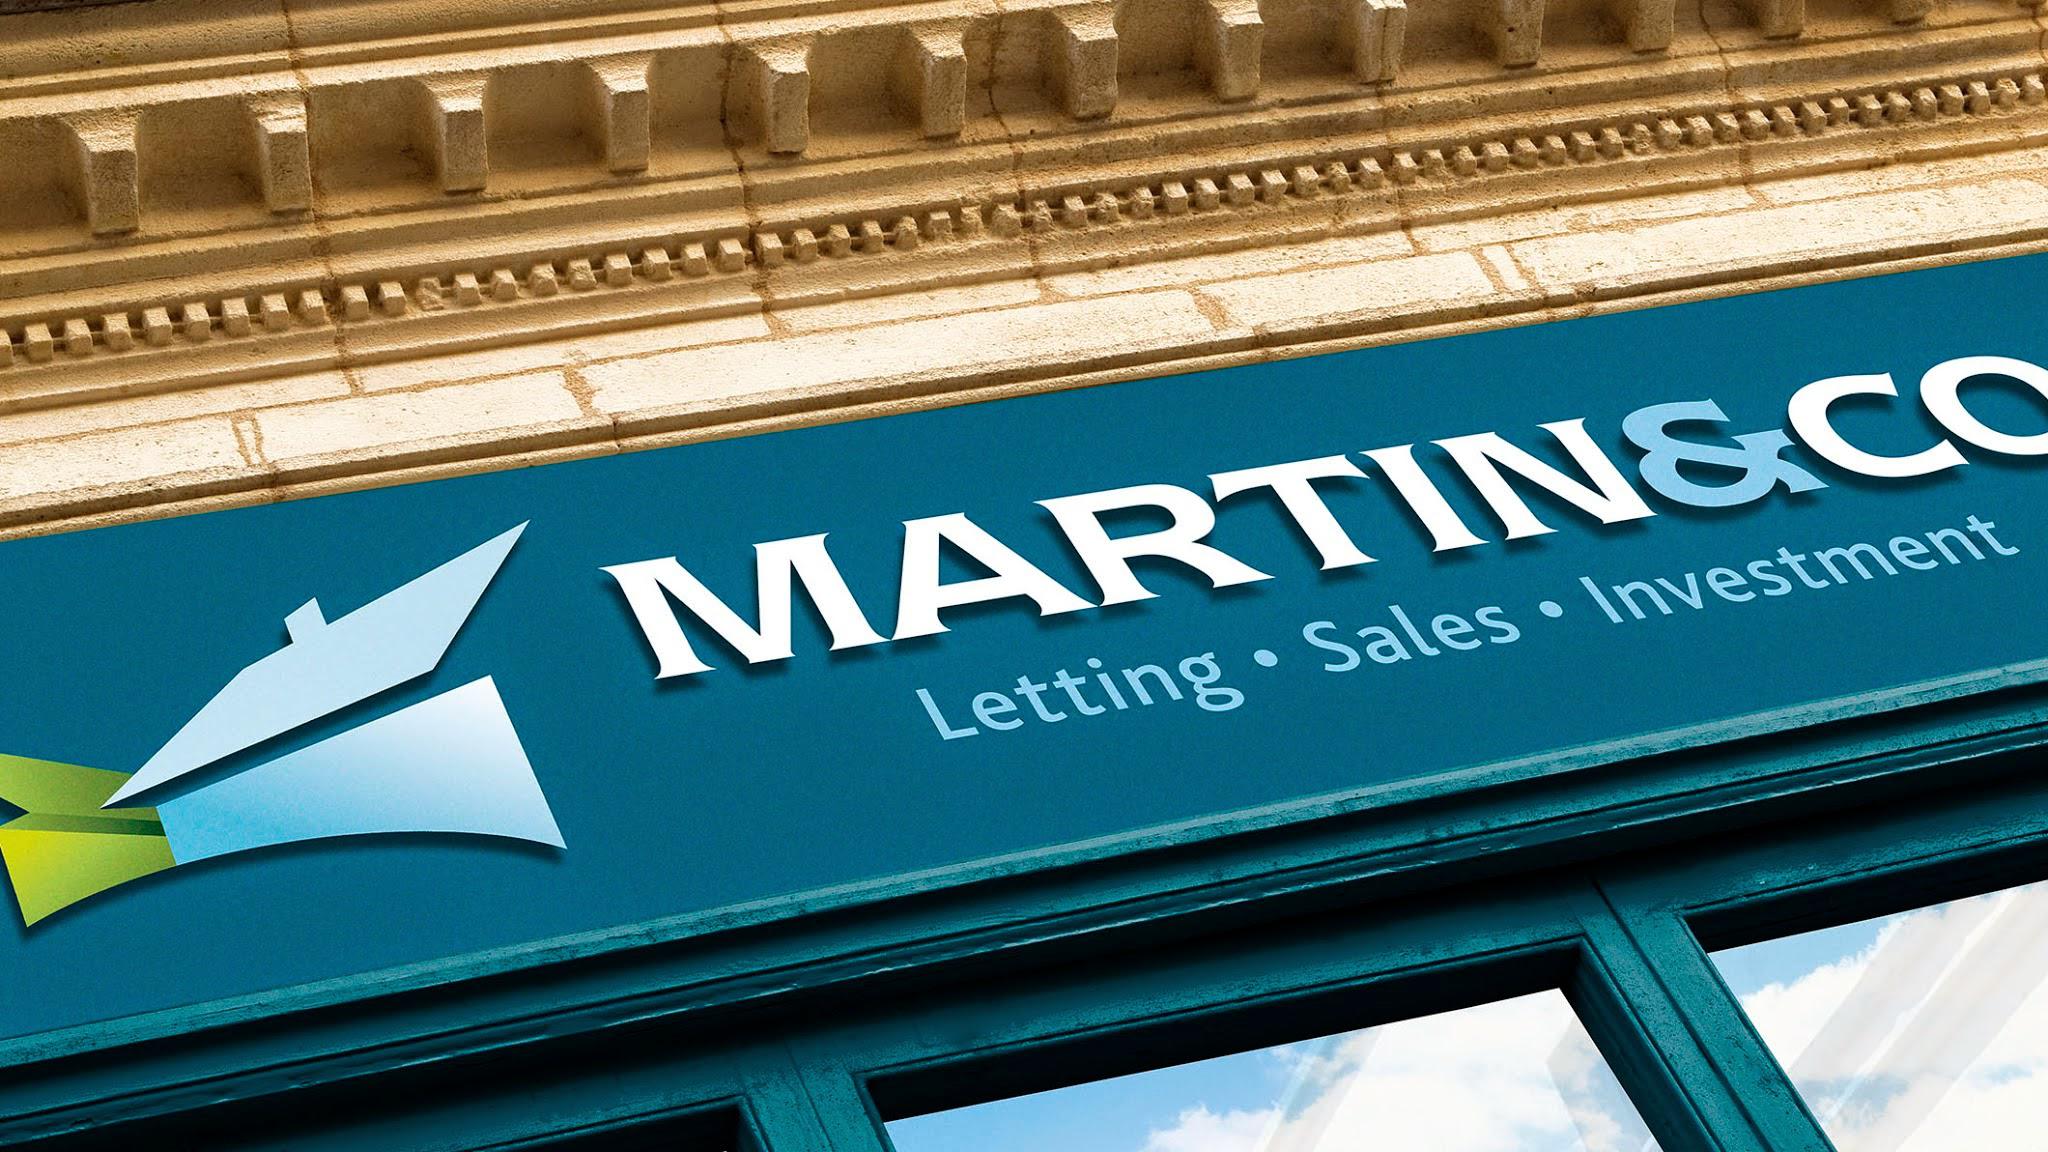 Images Martin & Co Glasgow West End Lettings & Estate Agents